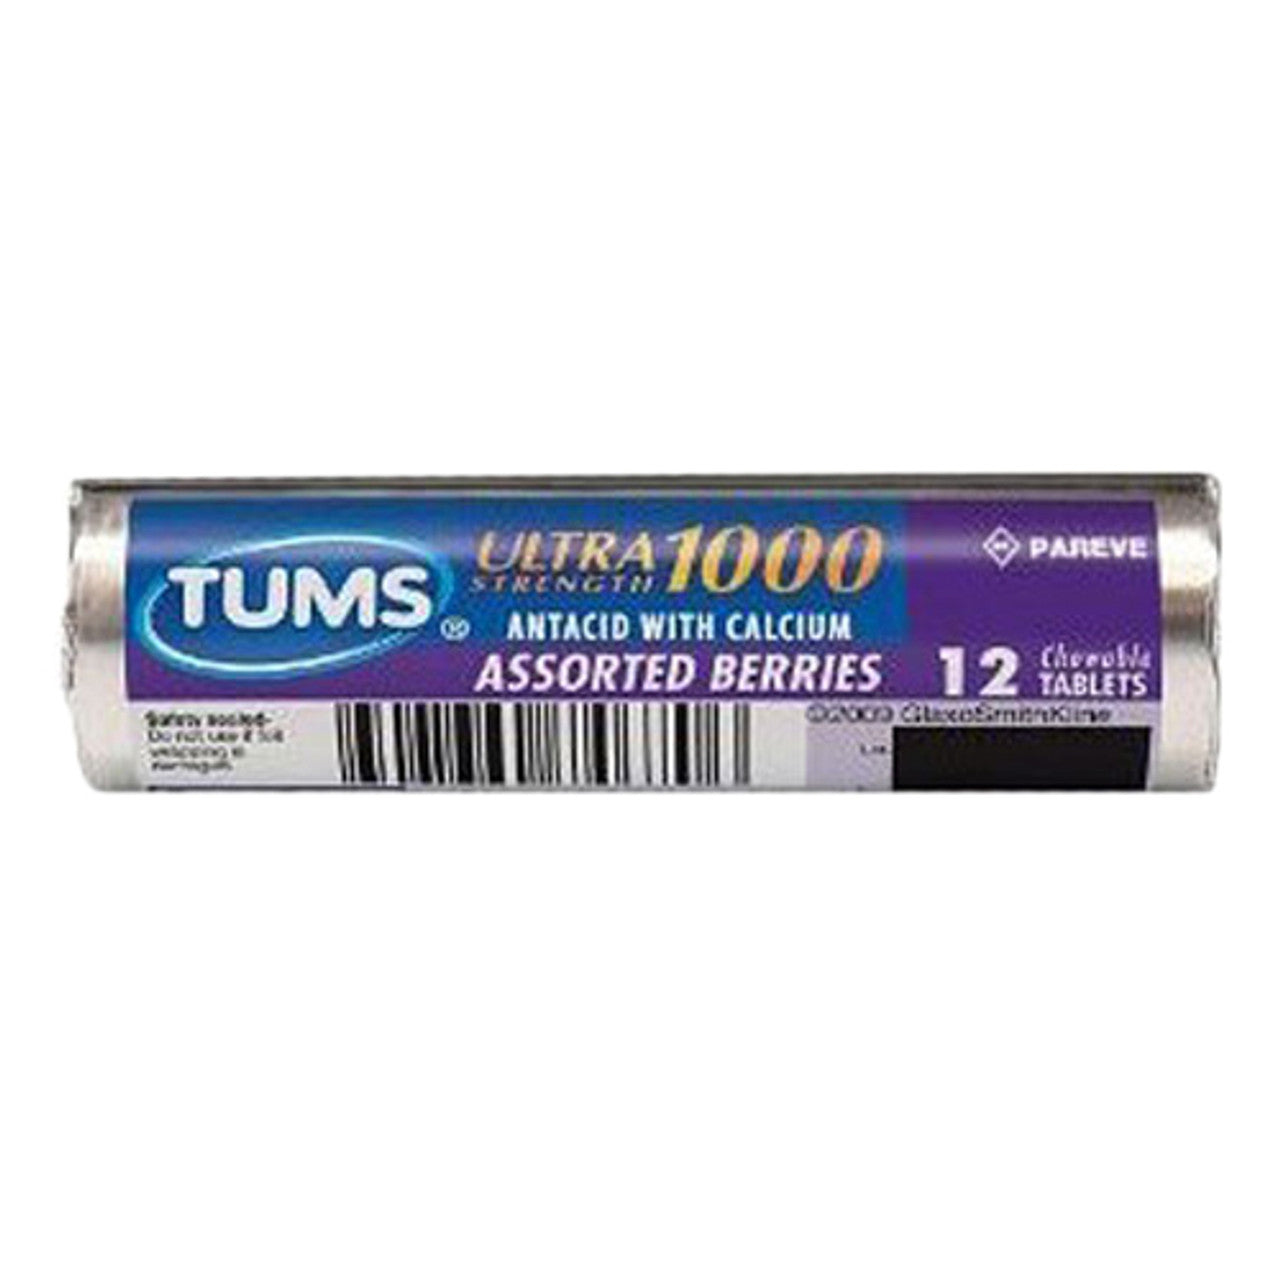 Tums Ultra 1000 Maximum Strength Heartburn Relief Chewable Tablets, Assorted Berries - 12 ea